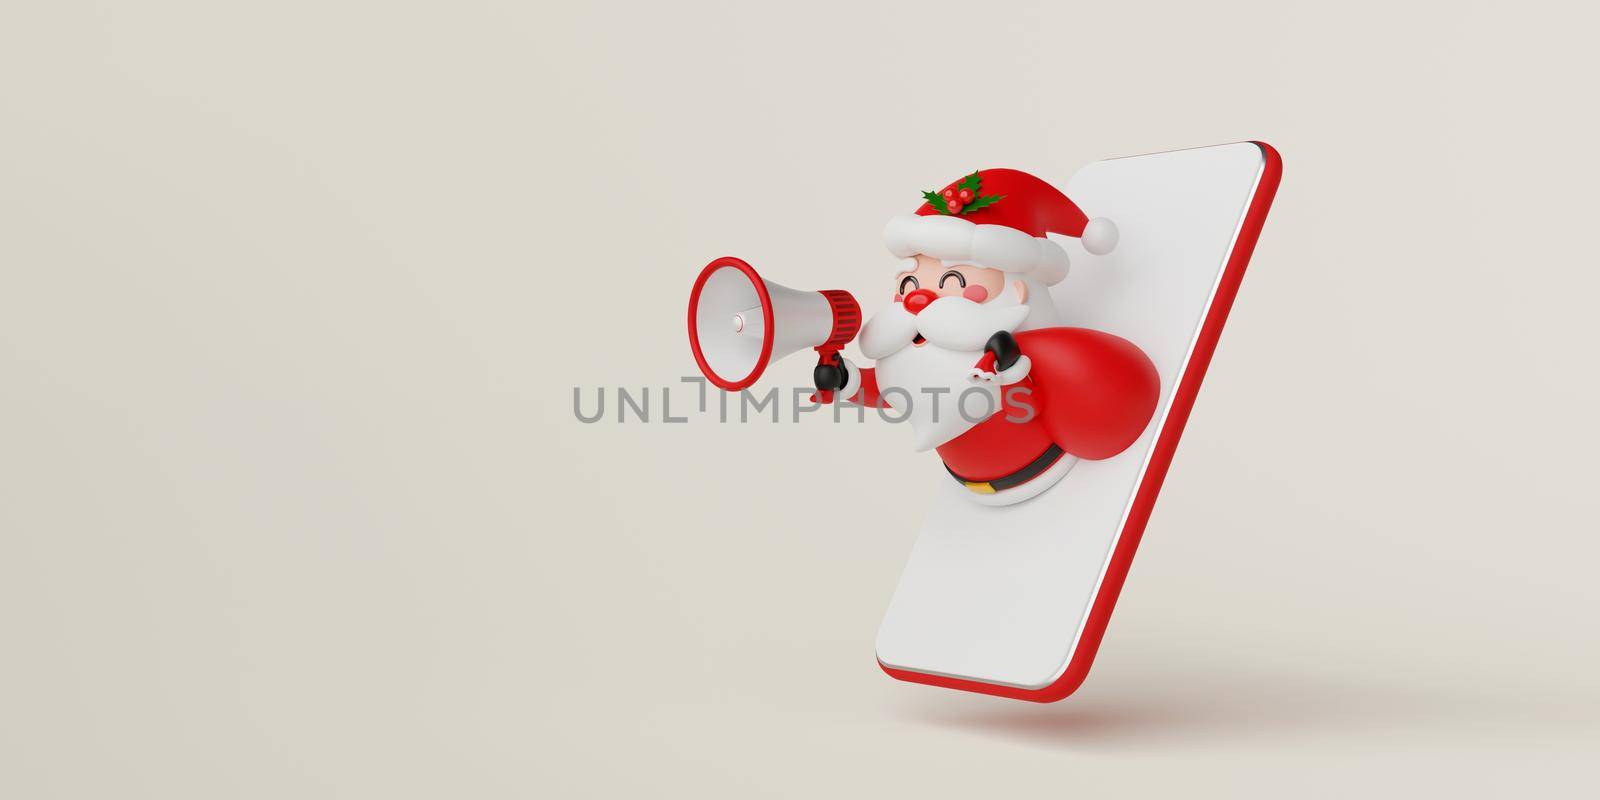 Christmas advertisement banner, Shopping online on mobile concept, Santa Claus hand holding megaphone pop out from mobile, 3d illustration